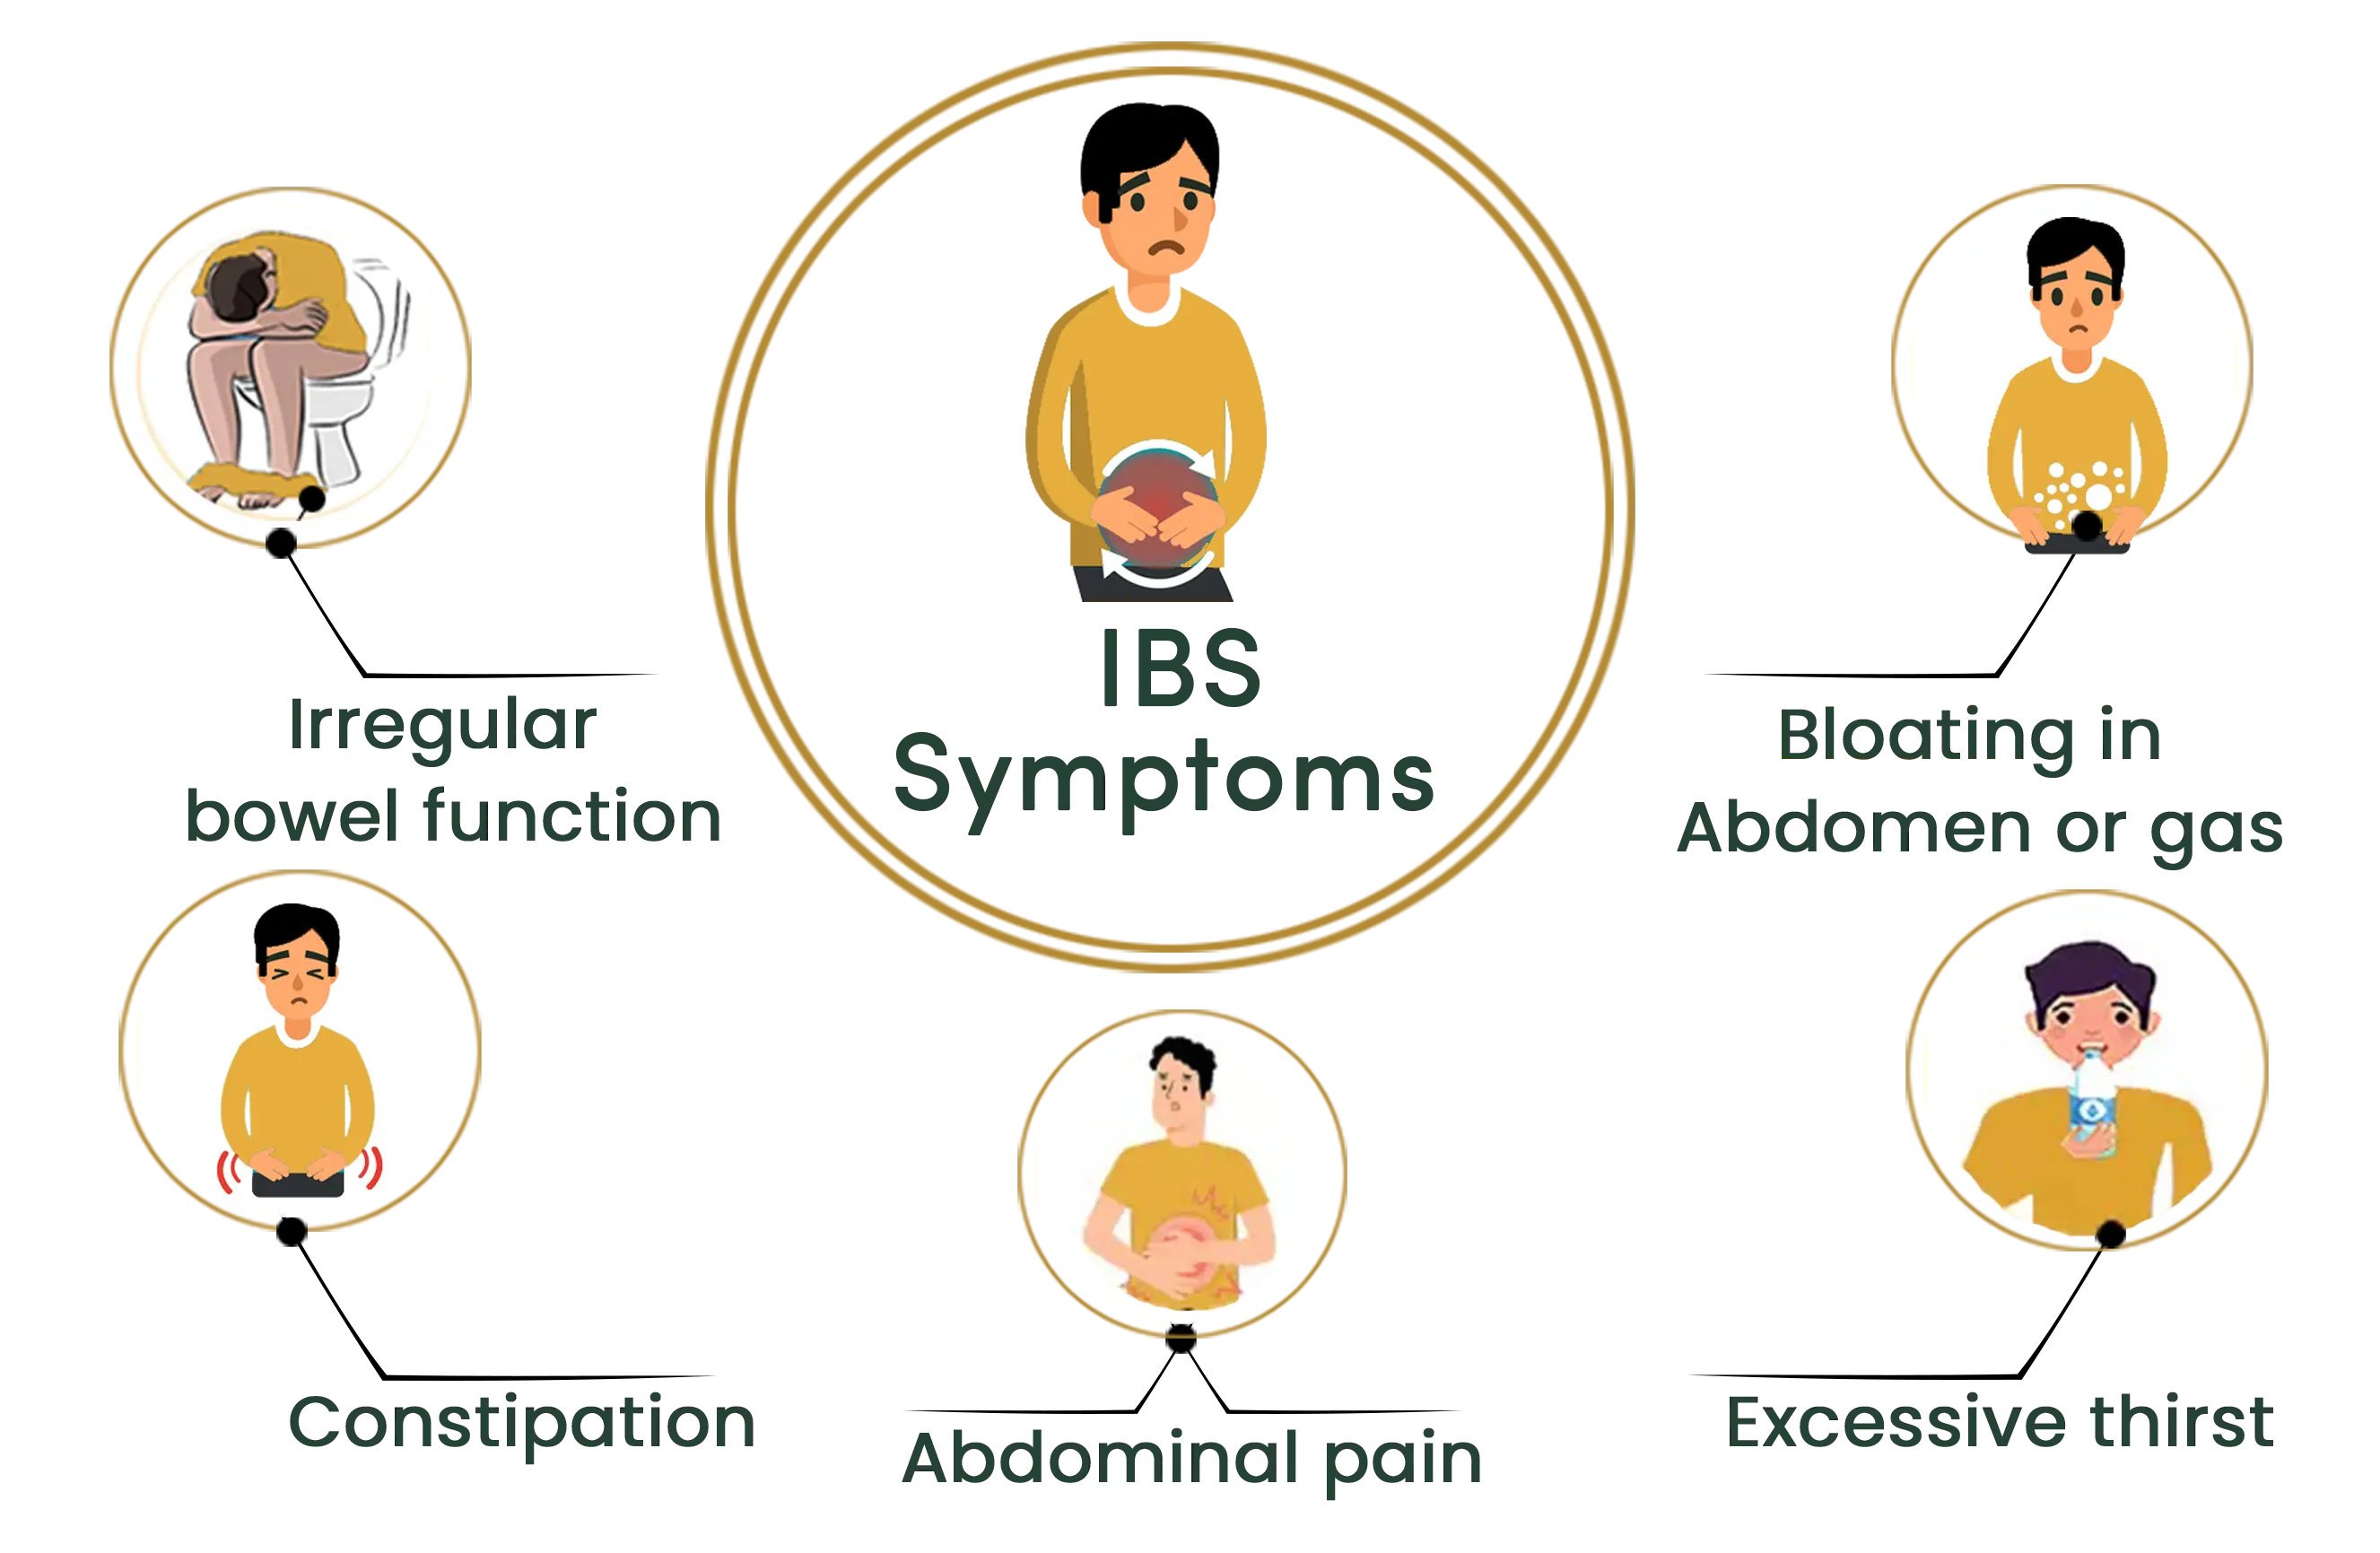 infographic showing symptoms of irritable bowel syndrome